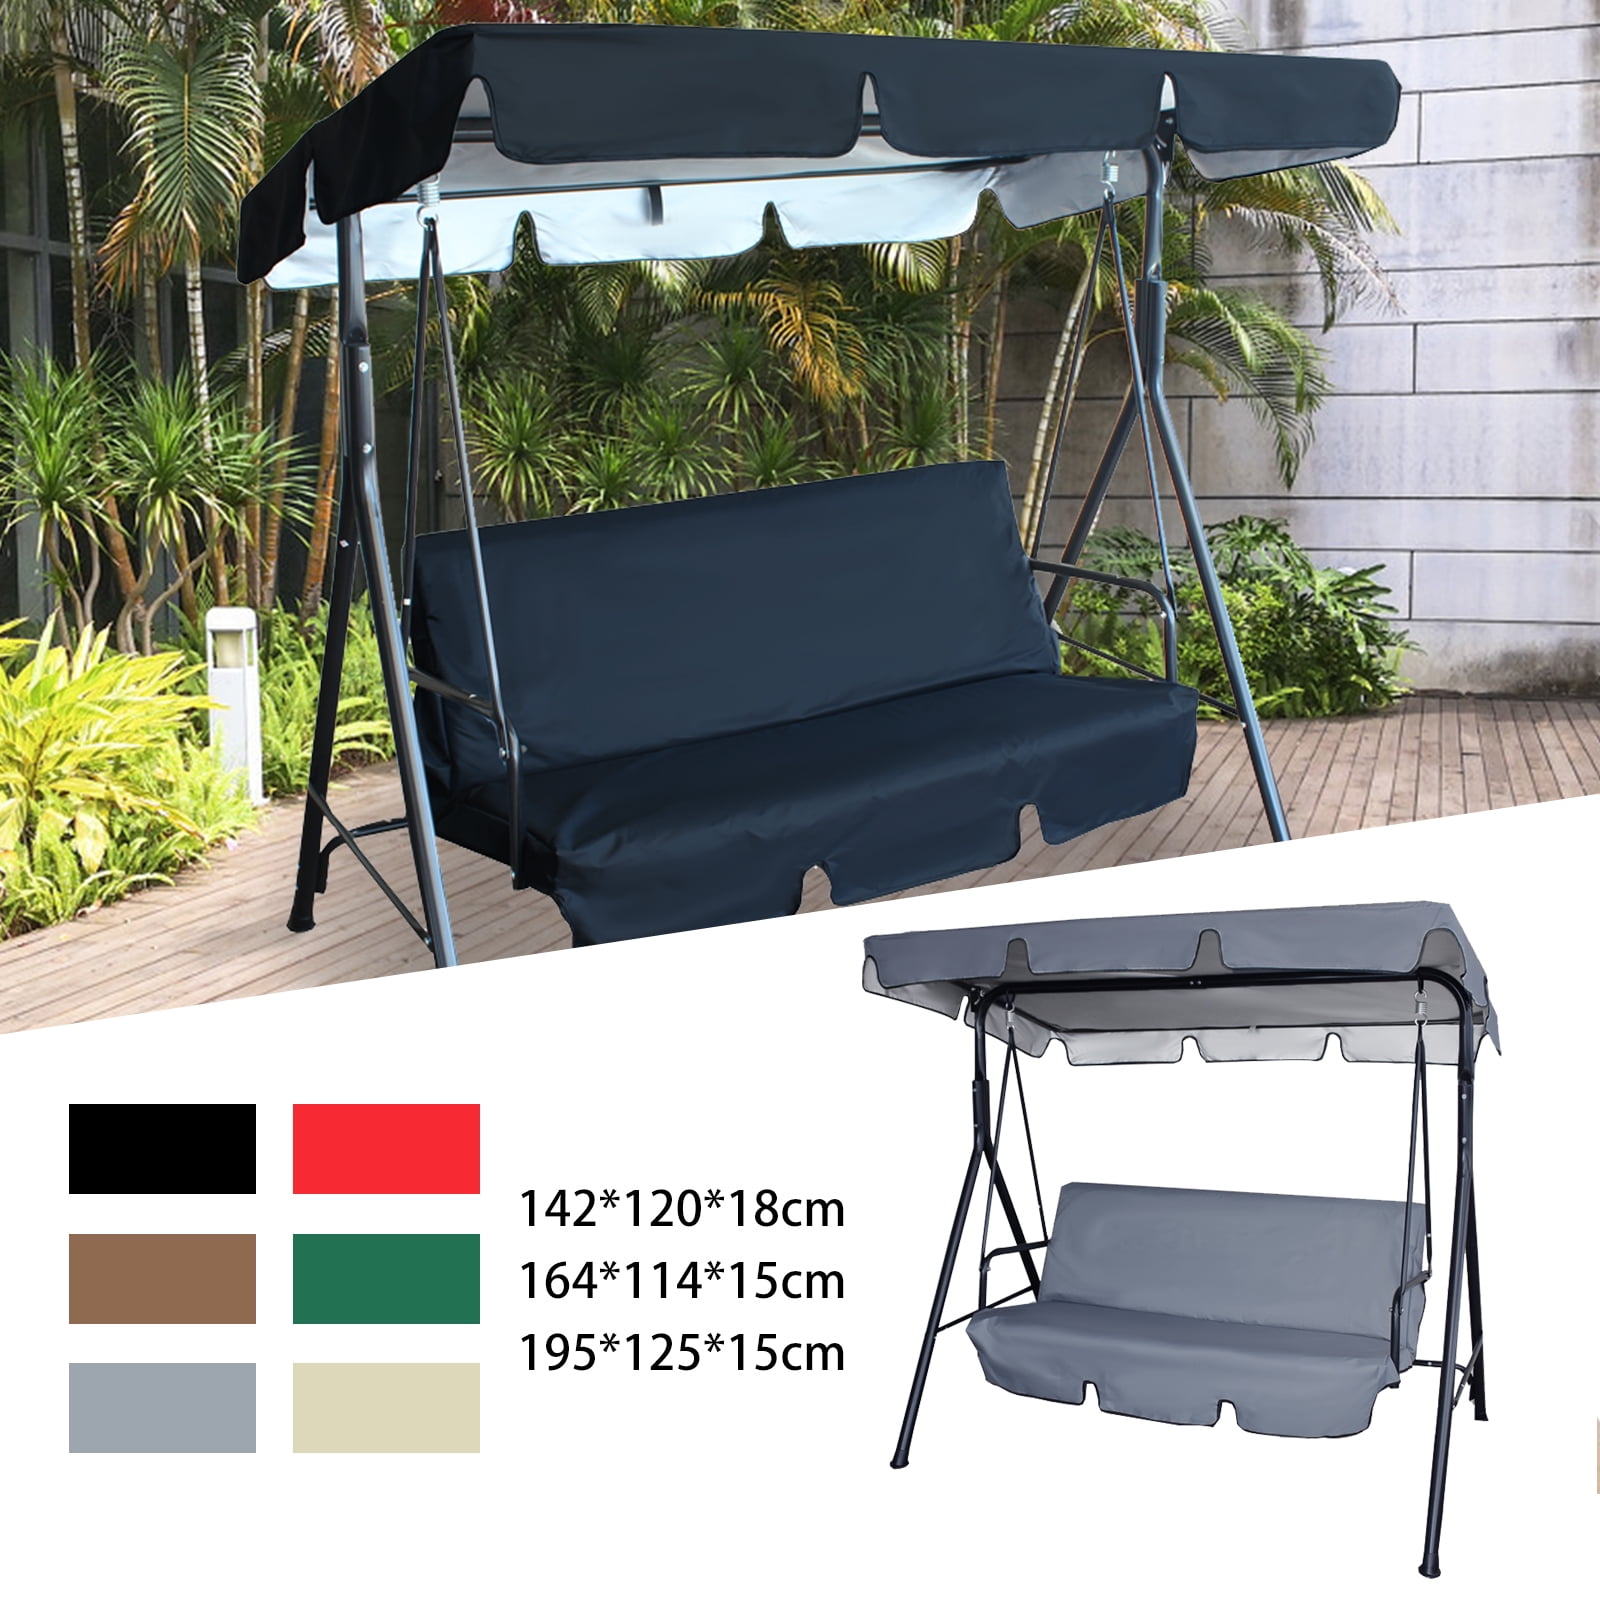 Anti-UV Swing Canopy Replacement Porch Top Cover Waterproof Swing Chair Seat Top Cover for Outdoor Garden Patio Porch Seat Furniture 195x125x15cm Swing Canopy Cover Beige 